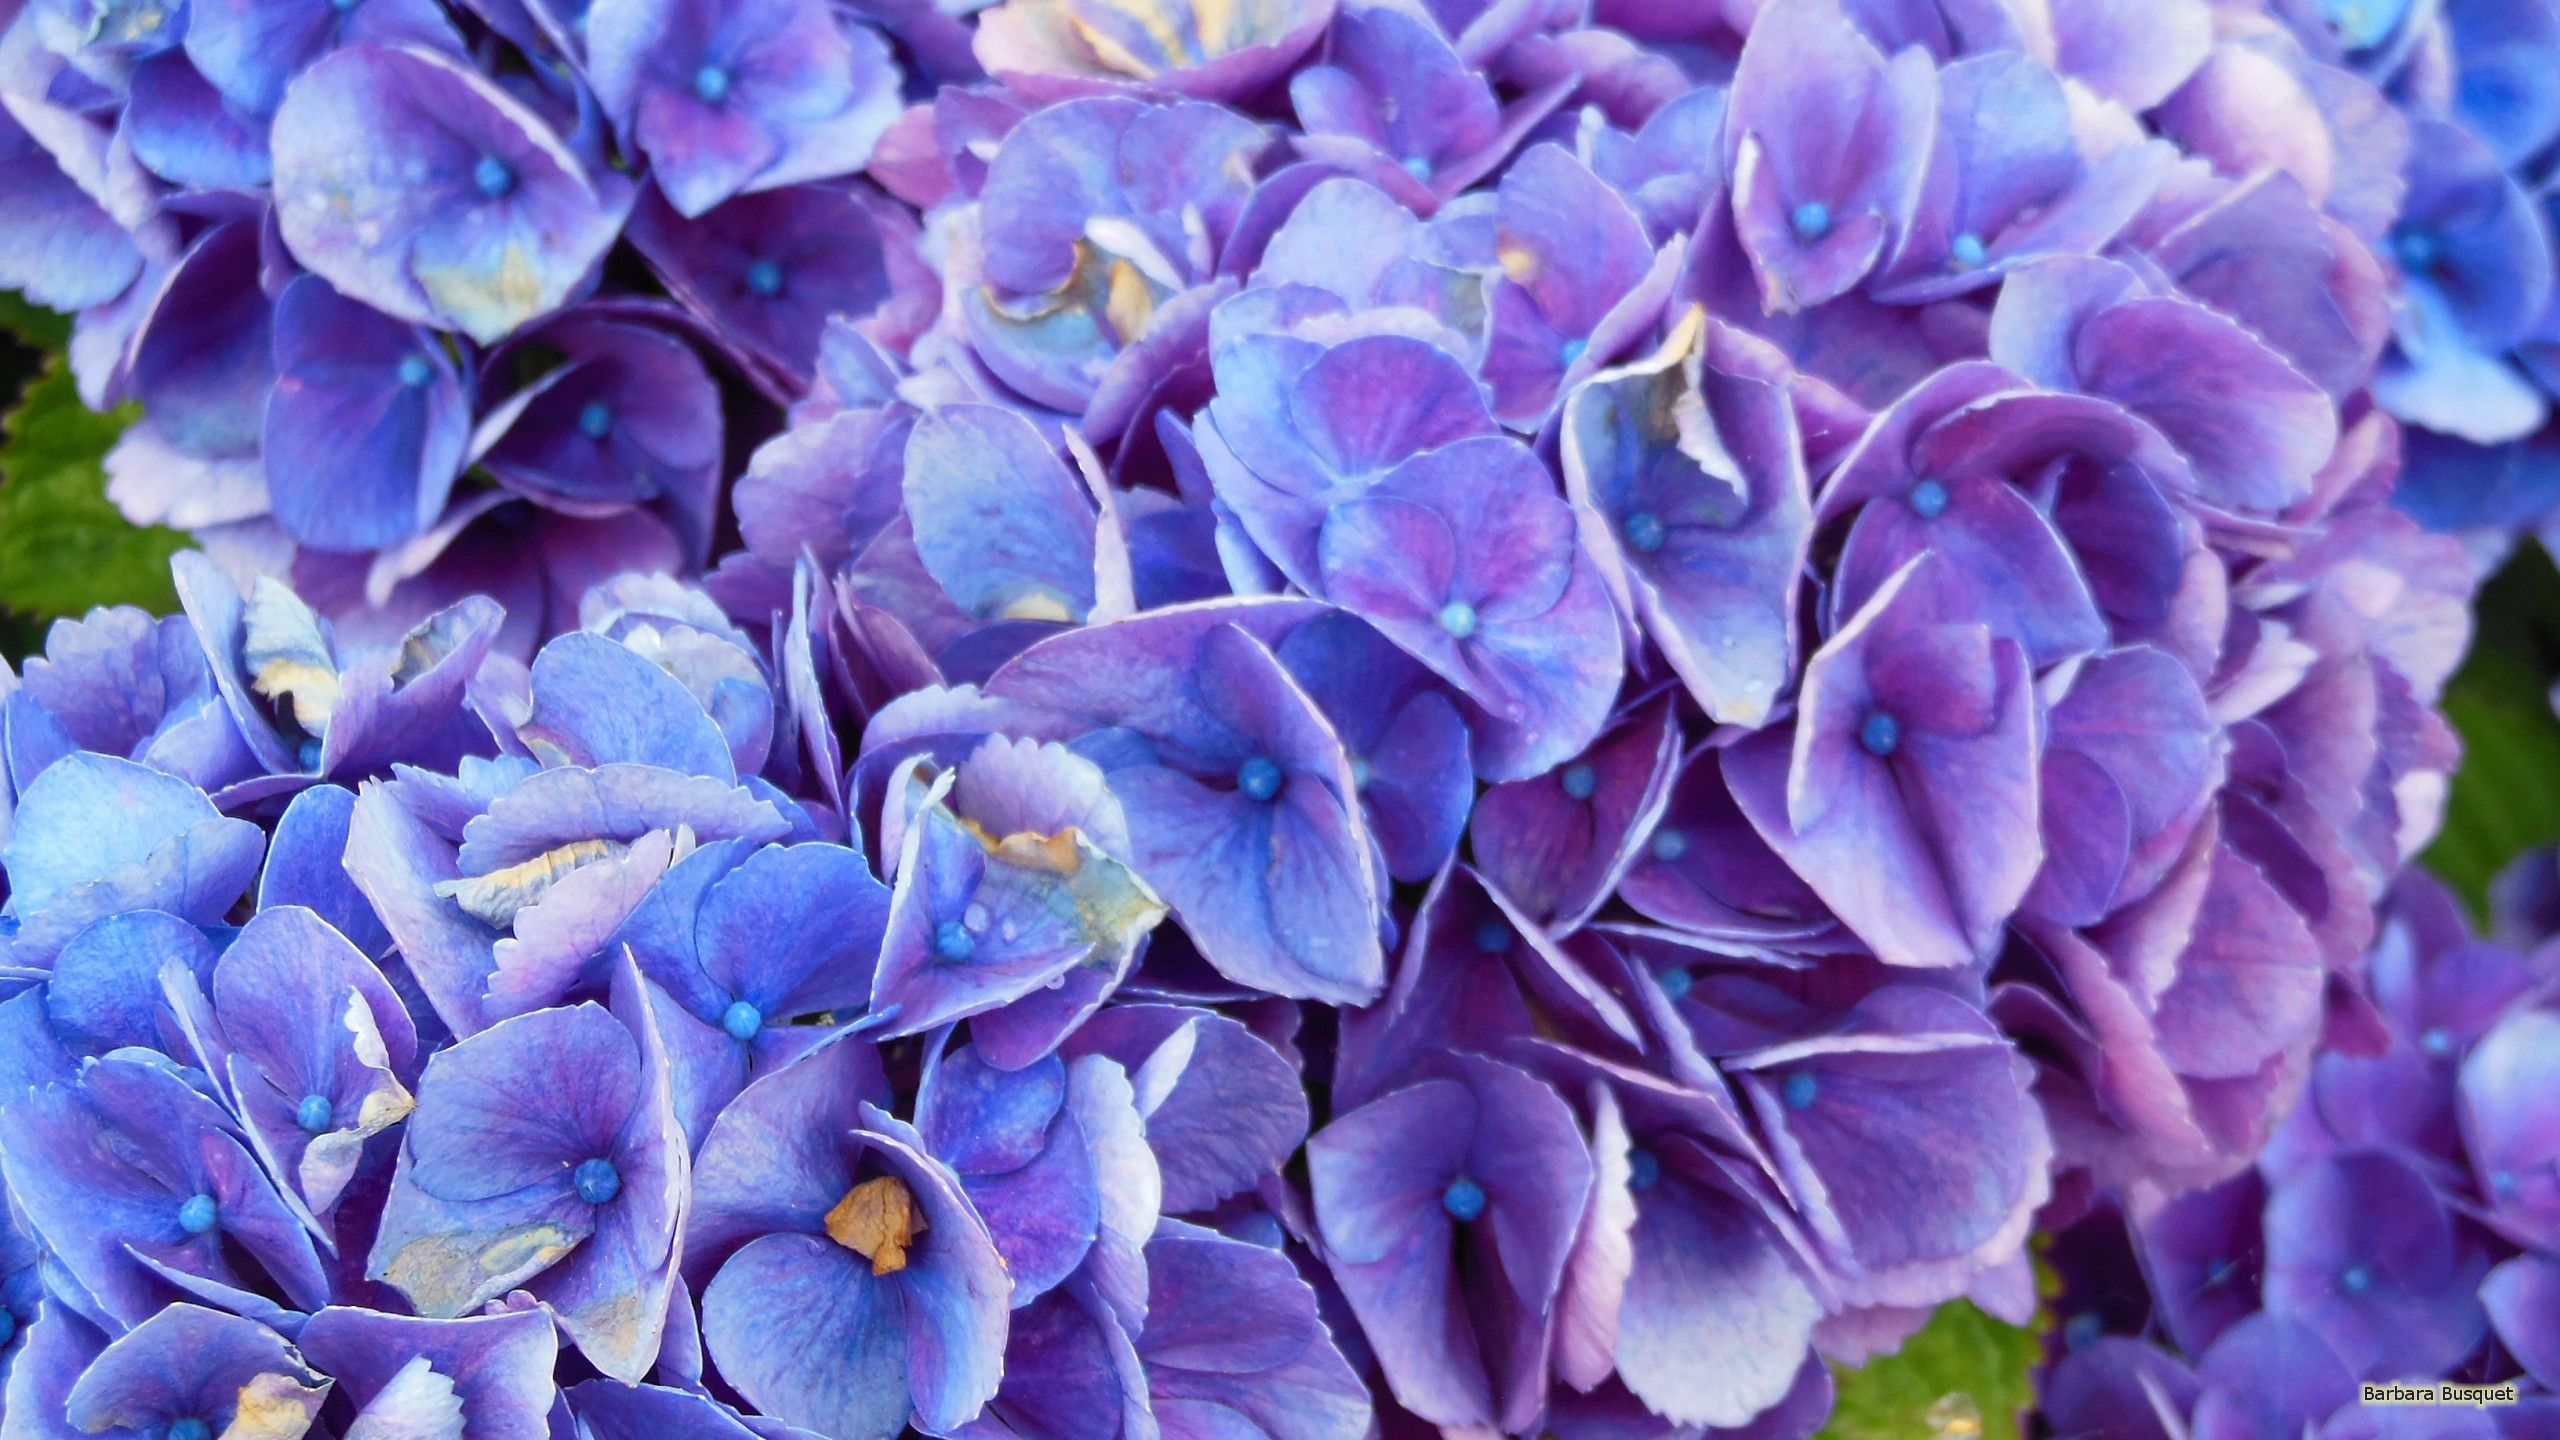 Purple Blue Flowers Image. Top Collection of different types